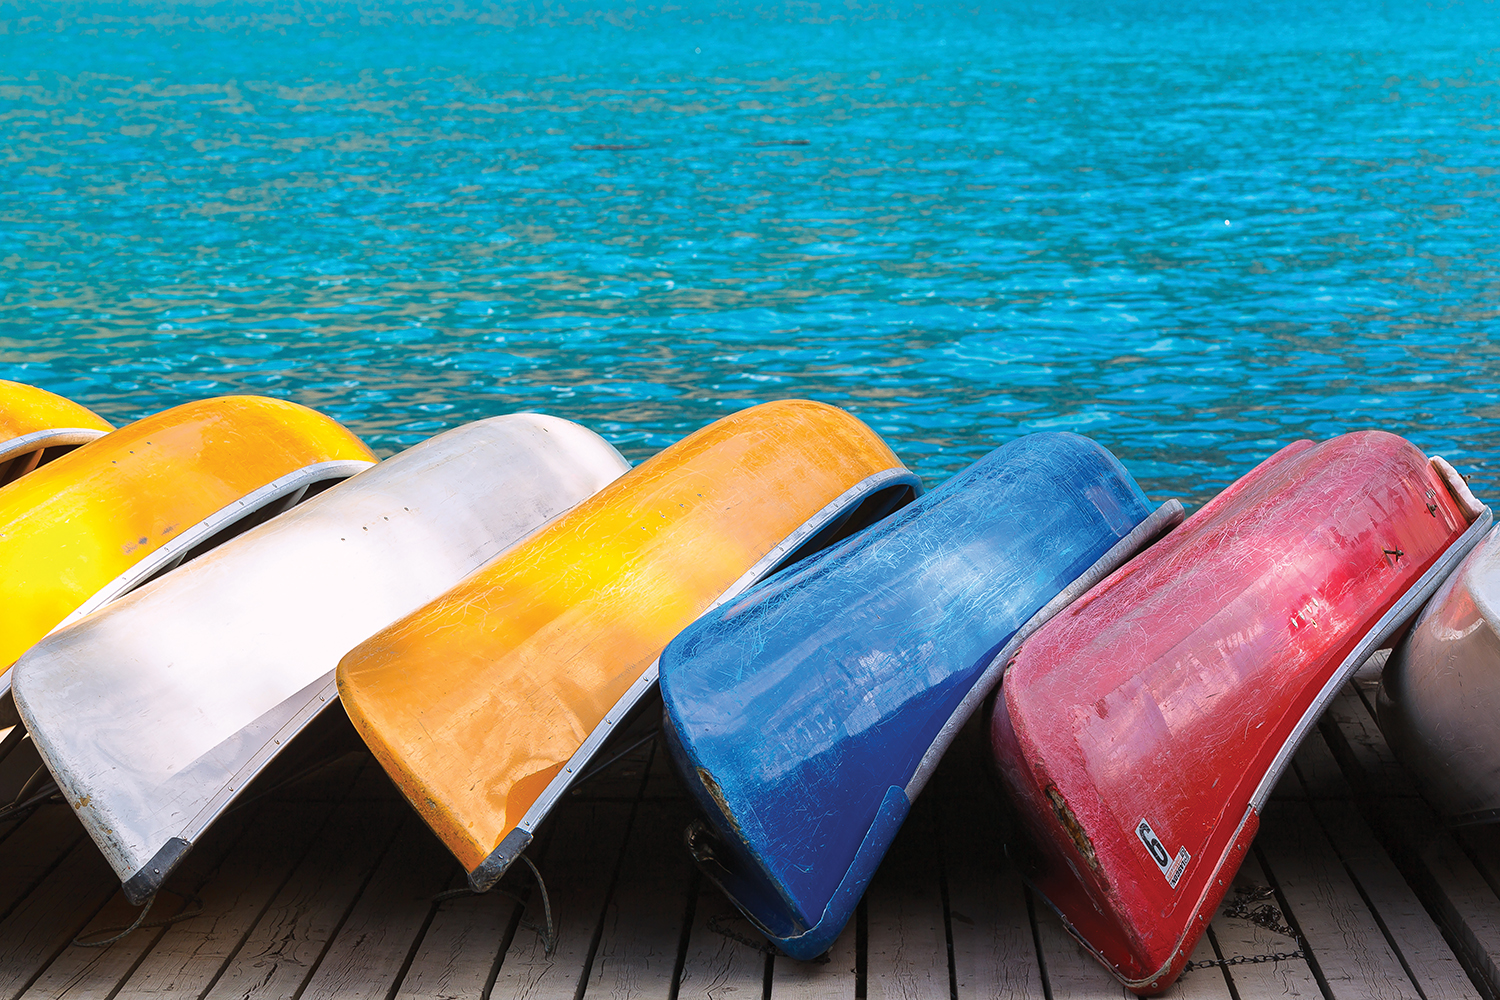 seven canoes including white, yellow, blue, and red, leaning on a dock by water